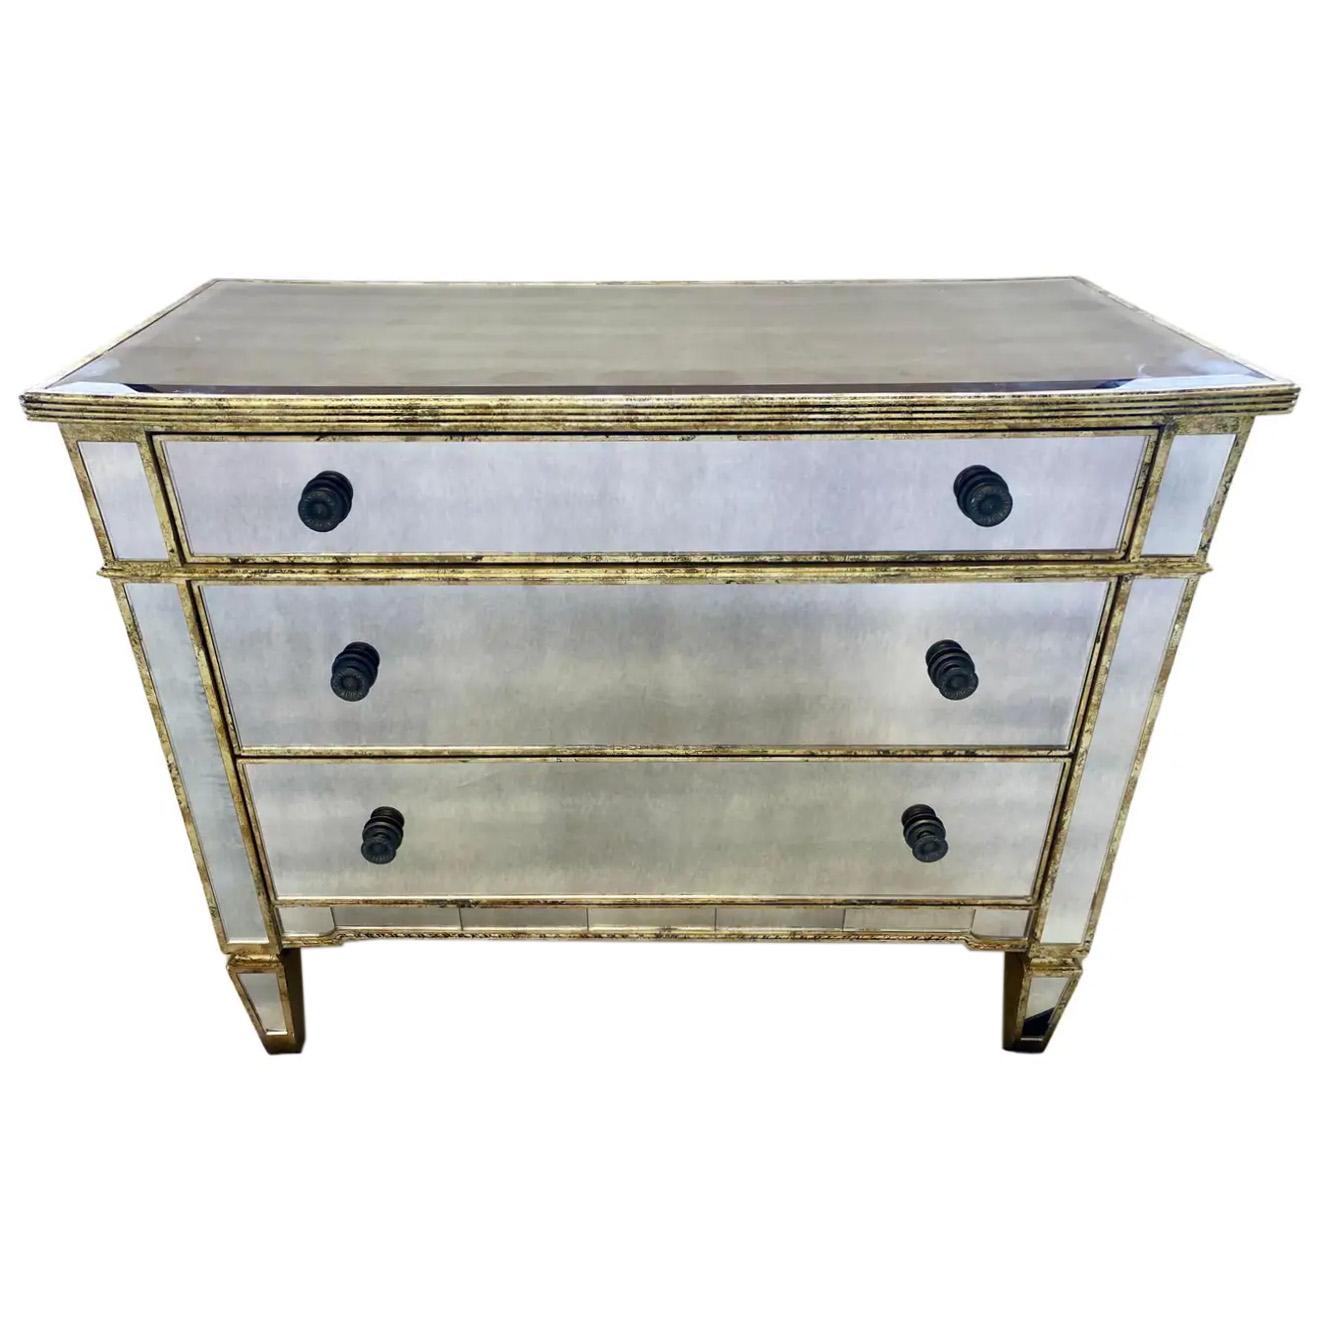 A quality Hollywood Regency style three drawer commode, dresser or chest. The commode features distressed mirrored glass and is embellished with gold Champagne trim or frame also in an antiqued finish with leaf pattern. 
The beautiful commode or